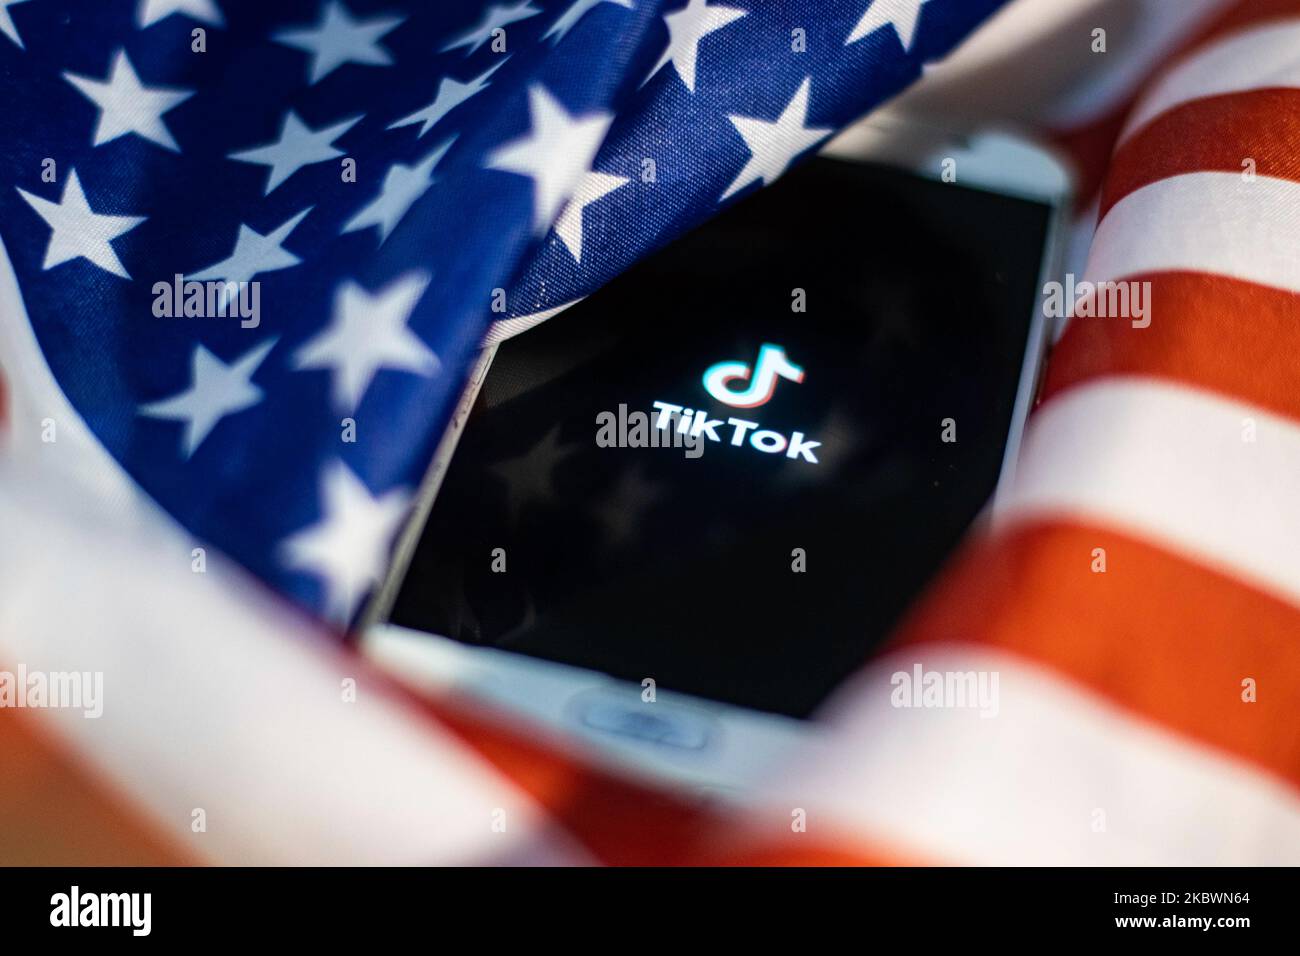 TikTok closeup logo displayed on a phone screen, smartphone on the American flag or U.S. flag, the national flag of the United States are seen in this multiple exposure illustration. Tik Tok is a Chinese video-sharing social networking service owned by a Beijing based internet technology company, ByteDance. It is used to create short dance, lip-sync, comedy and talent videos. ByteDance launched TikTok app for iOS and Android in 2017 and earlier in September 2016 Douyin fror the market in China. TikTok became the most downloaded app in the US in October 2018. President of the USA Donald Trump i Stock Photo